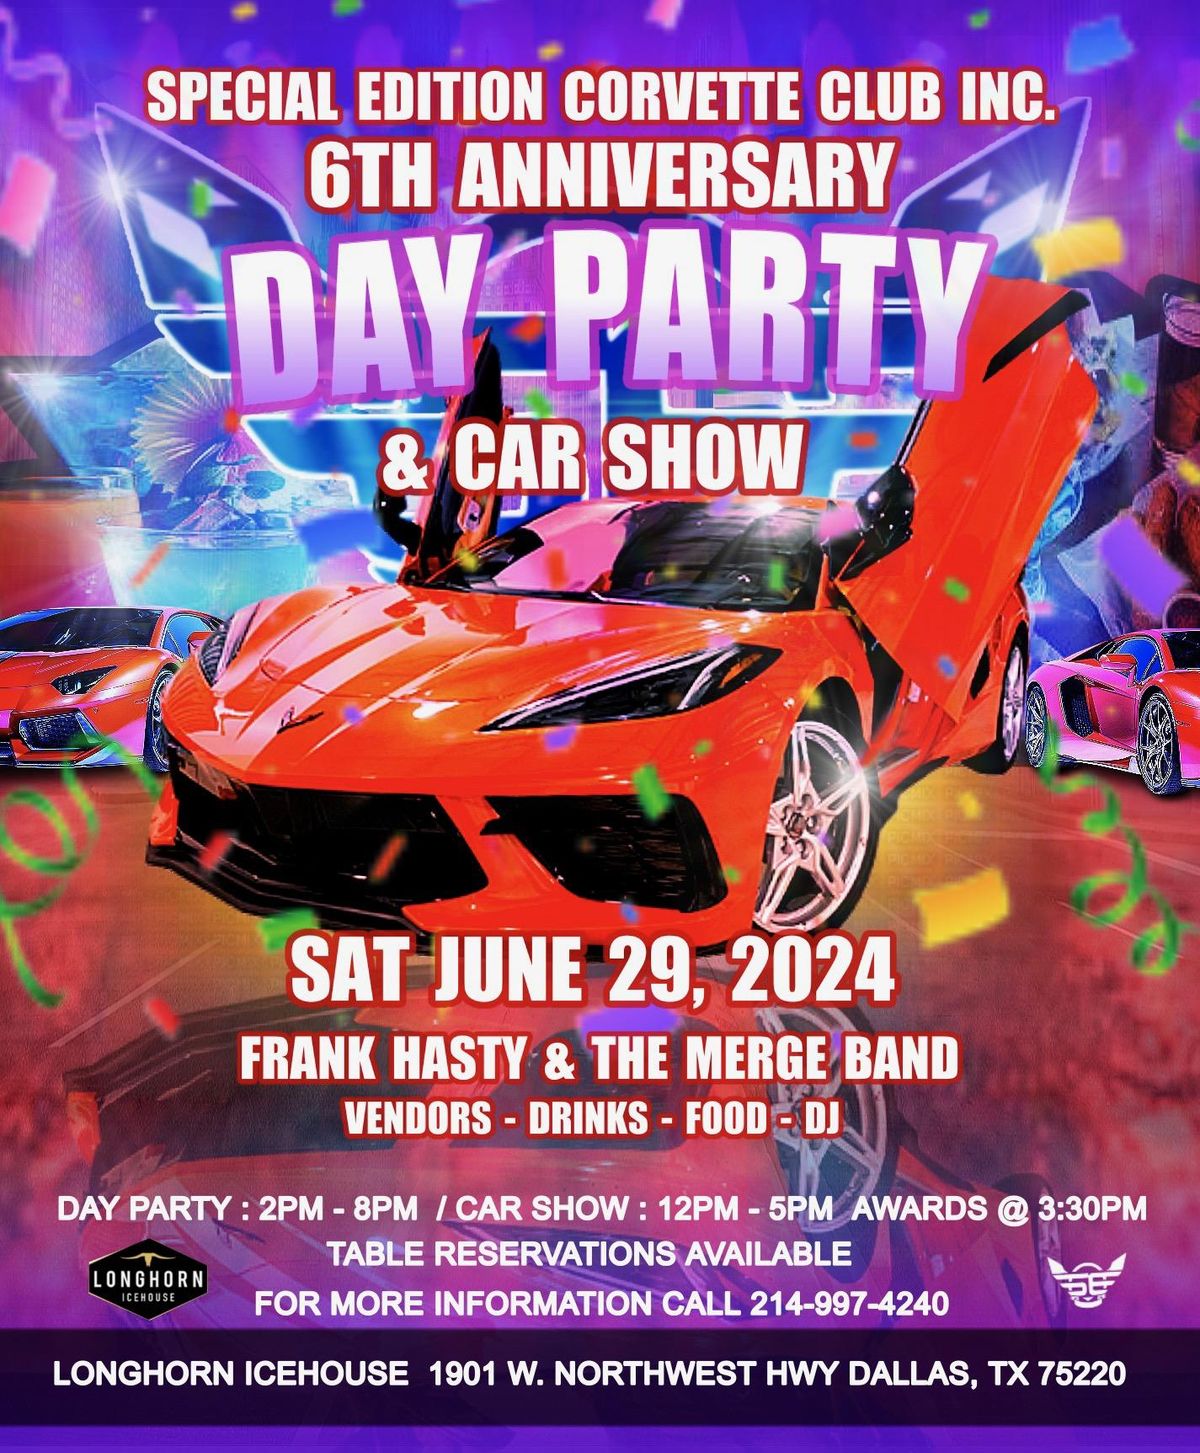 Special Edition Corvette Club Inc. 6th Anniversary Day Party & Car Show